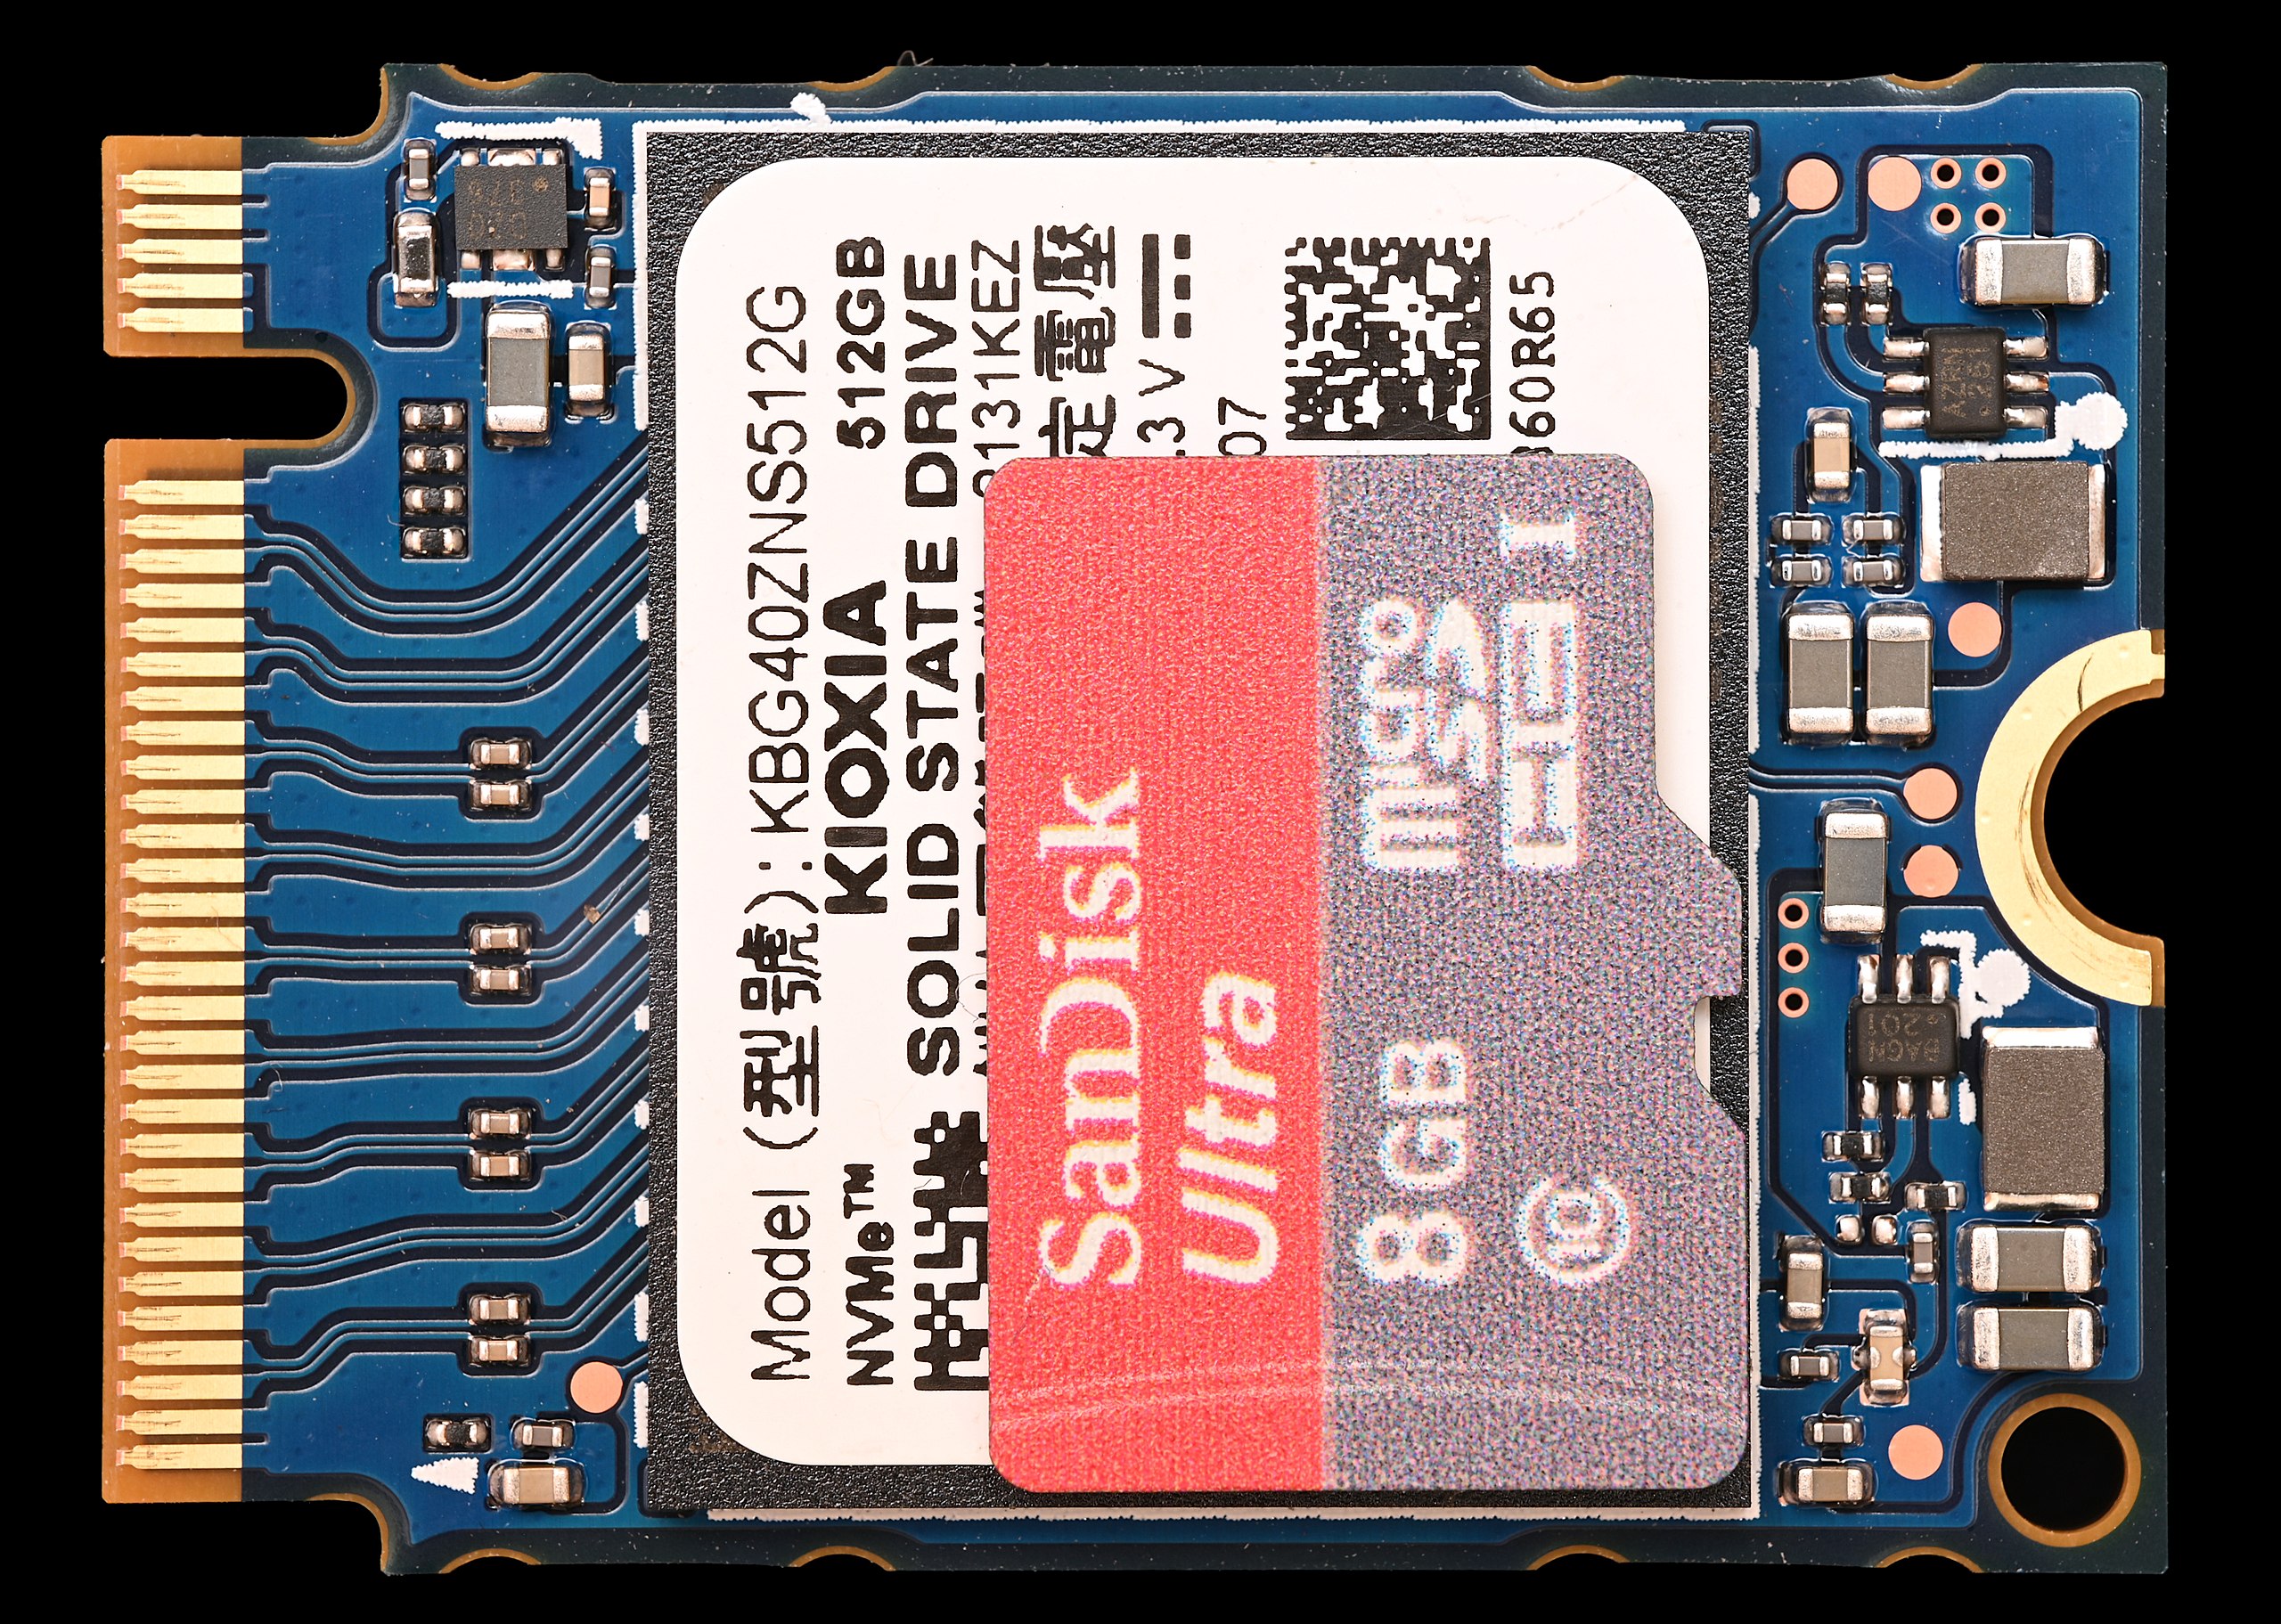 File:M.2 2230 M-key SSD in comparison with Micro-SD card.jpg